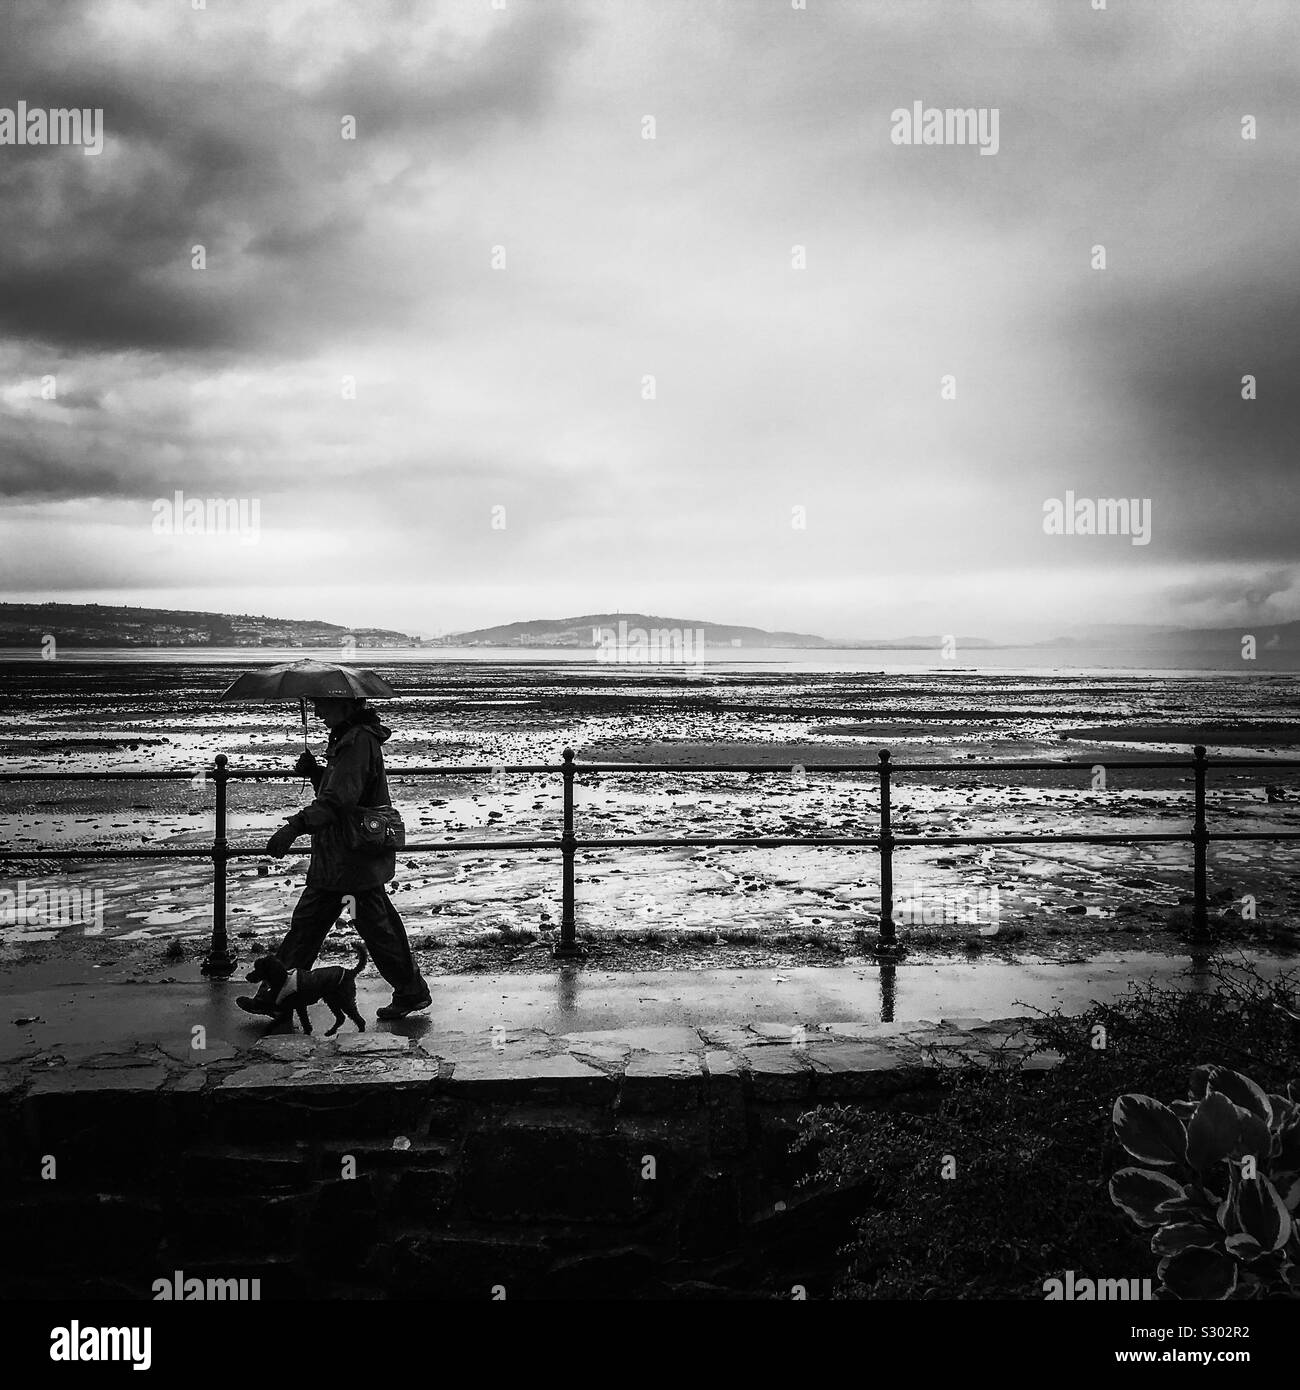 A brisk seaside walk along the coastline promenade seafront in wet rainy day weather holding an umbrella with a dog beside at heel Stock Photo